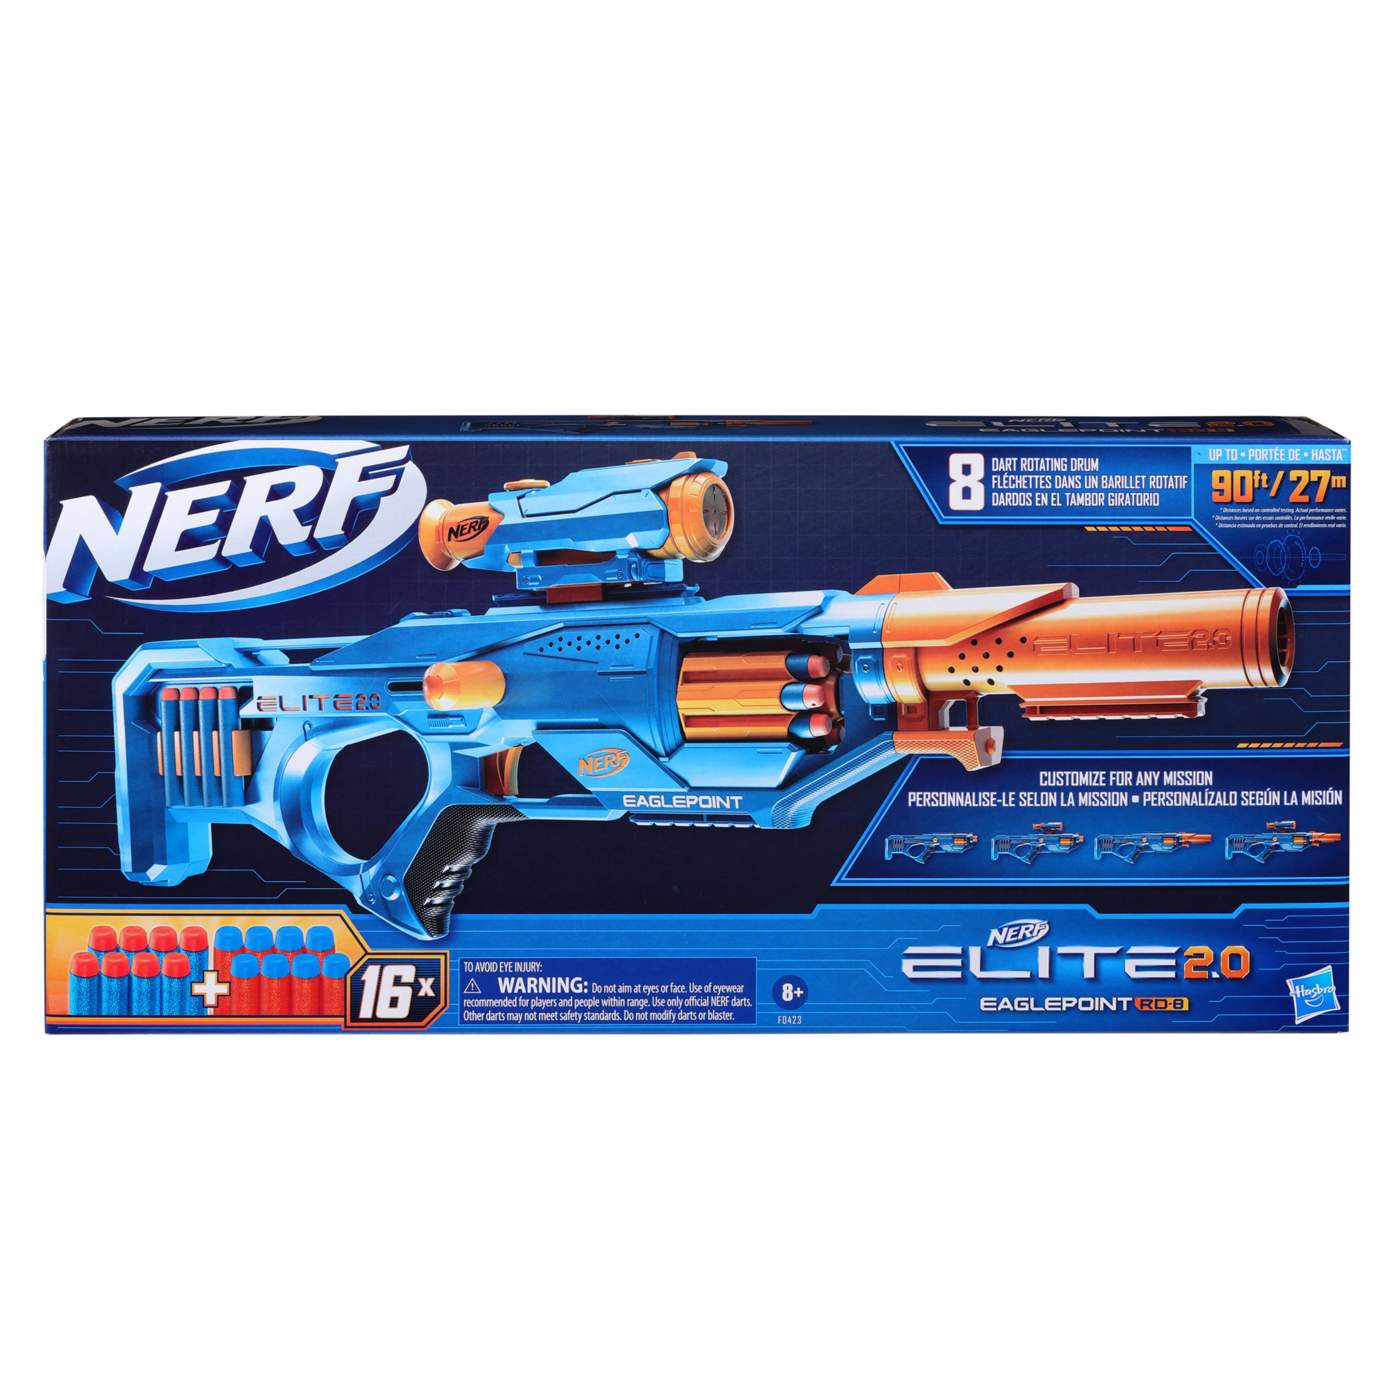 Nerf 2.0 Eaglepoint RD-8 Dart - Shop Blasters at